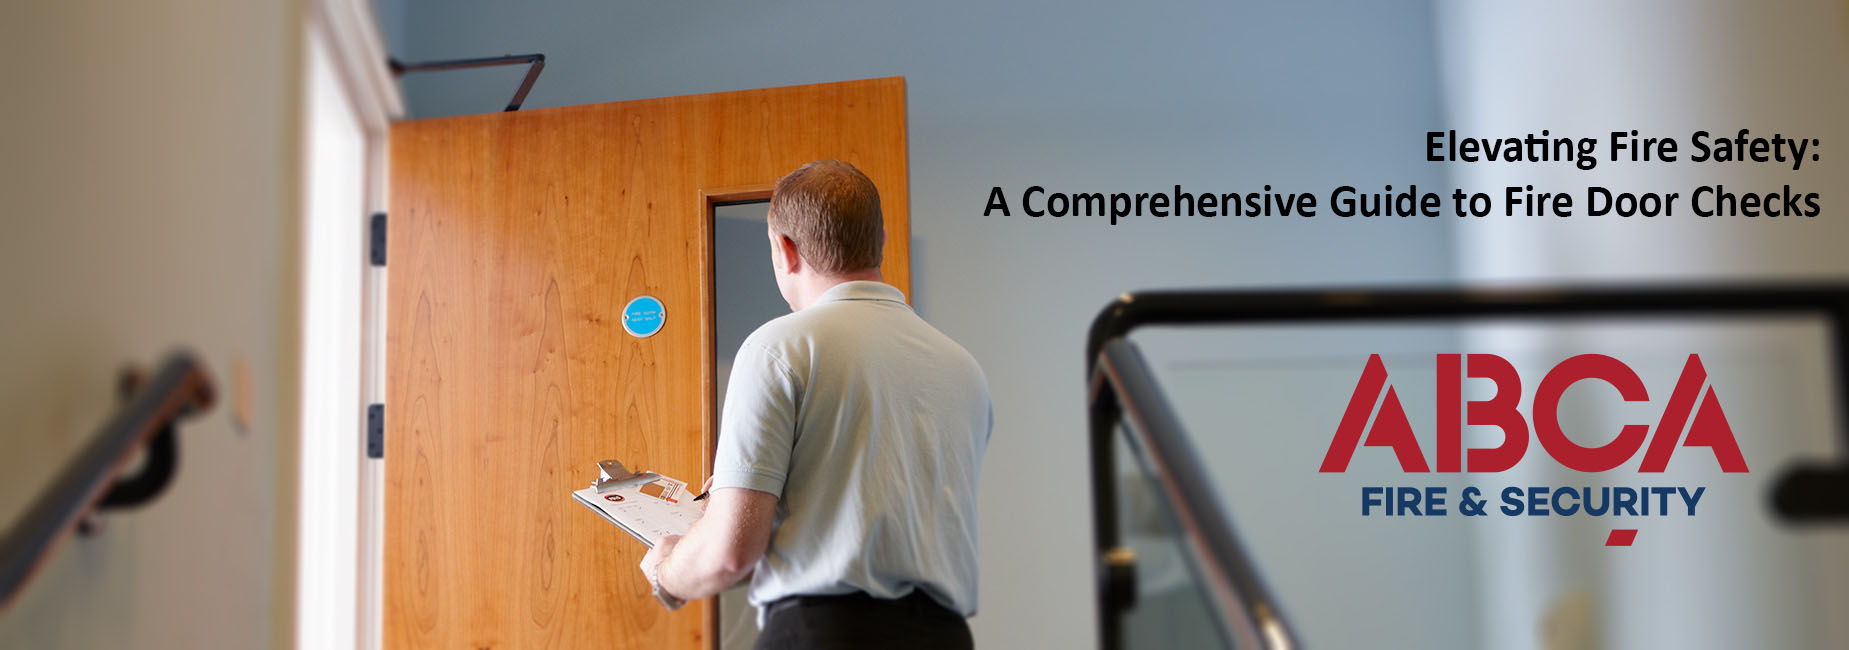 Elevating Fire Safety: A Comprehensive Guide to Fire Door Checks